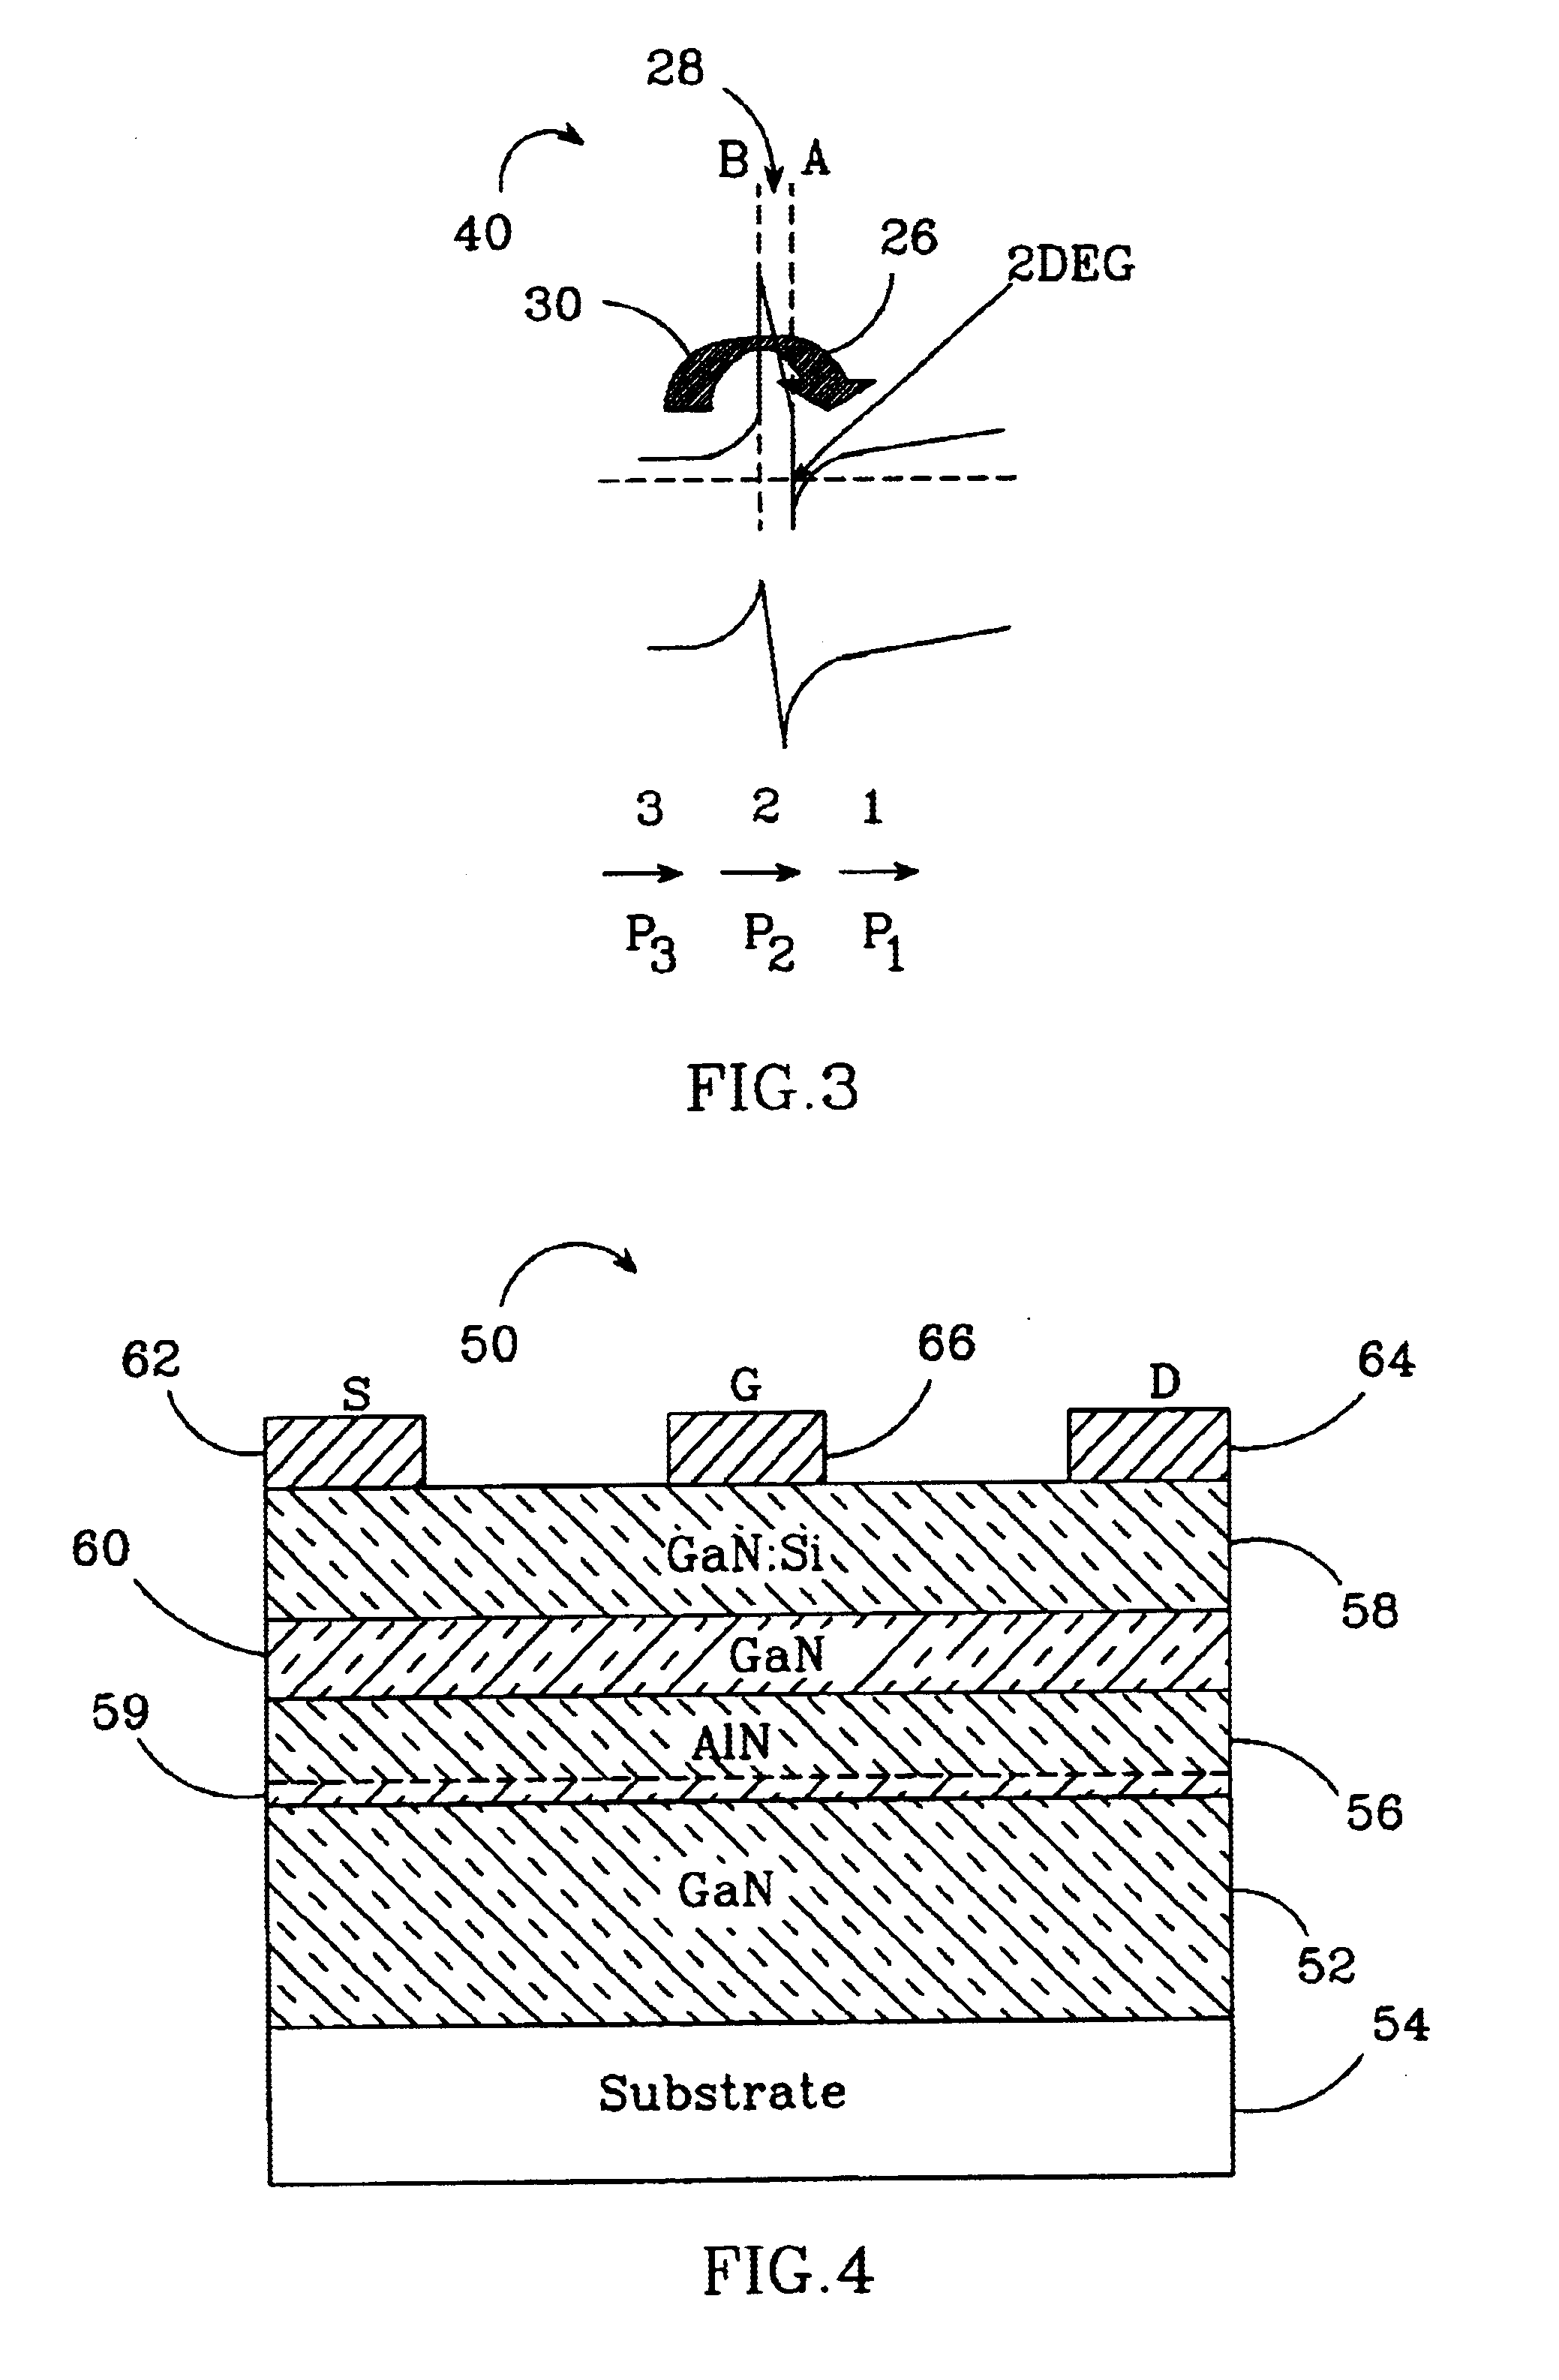 Group-III nitride based high electron mobility transistor (HEMT) with barrier/spacer layer